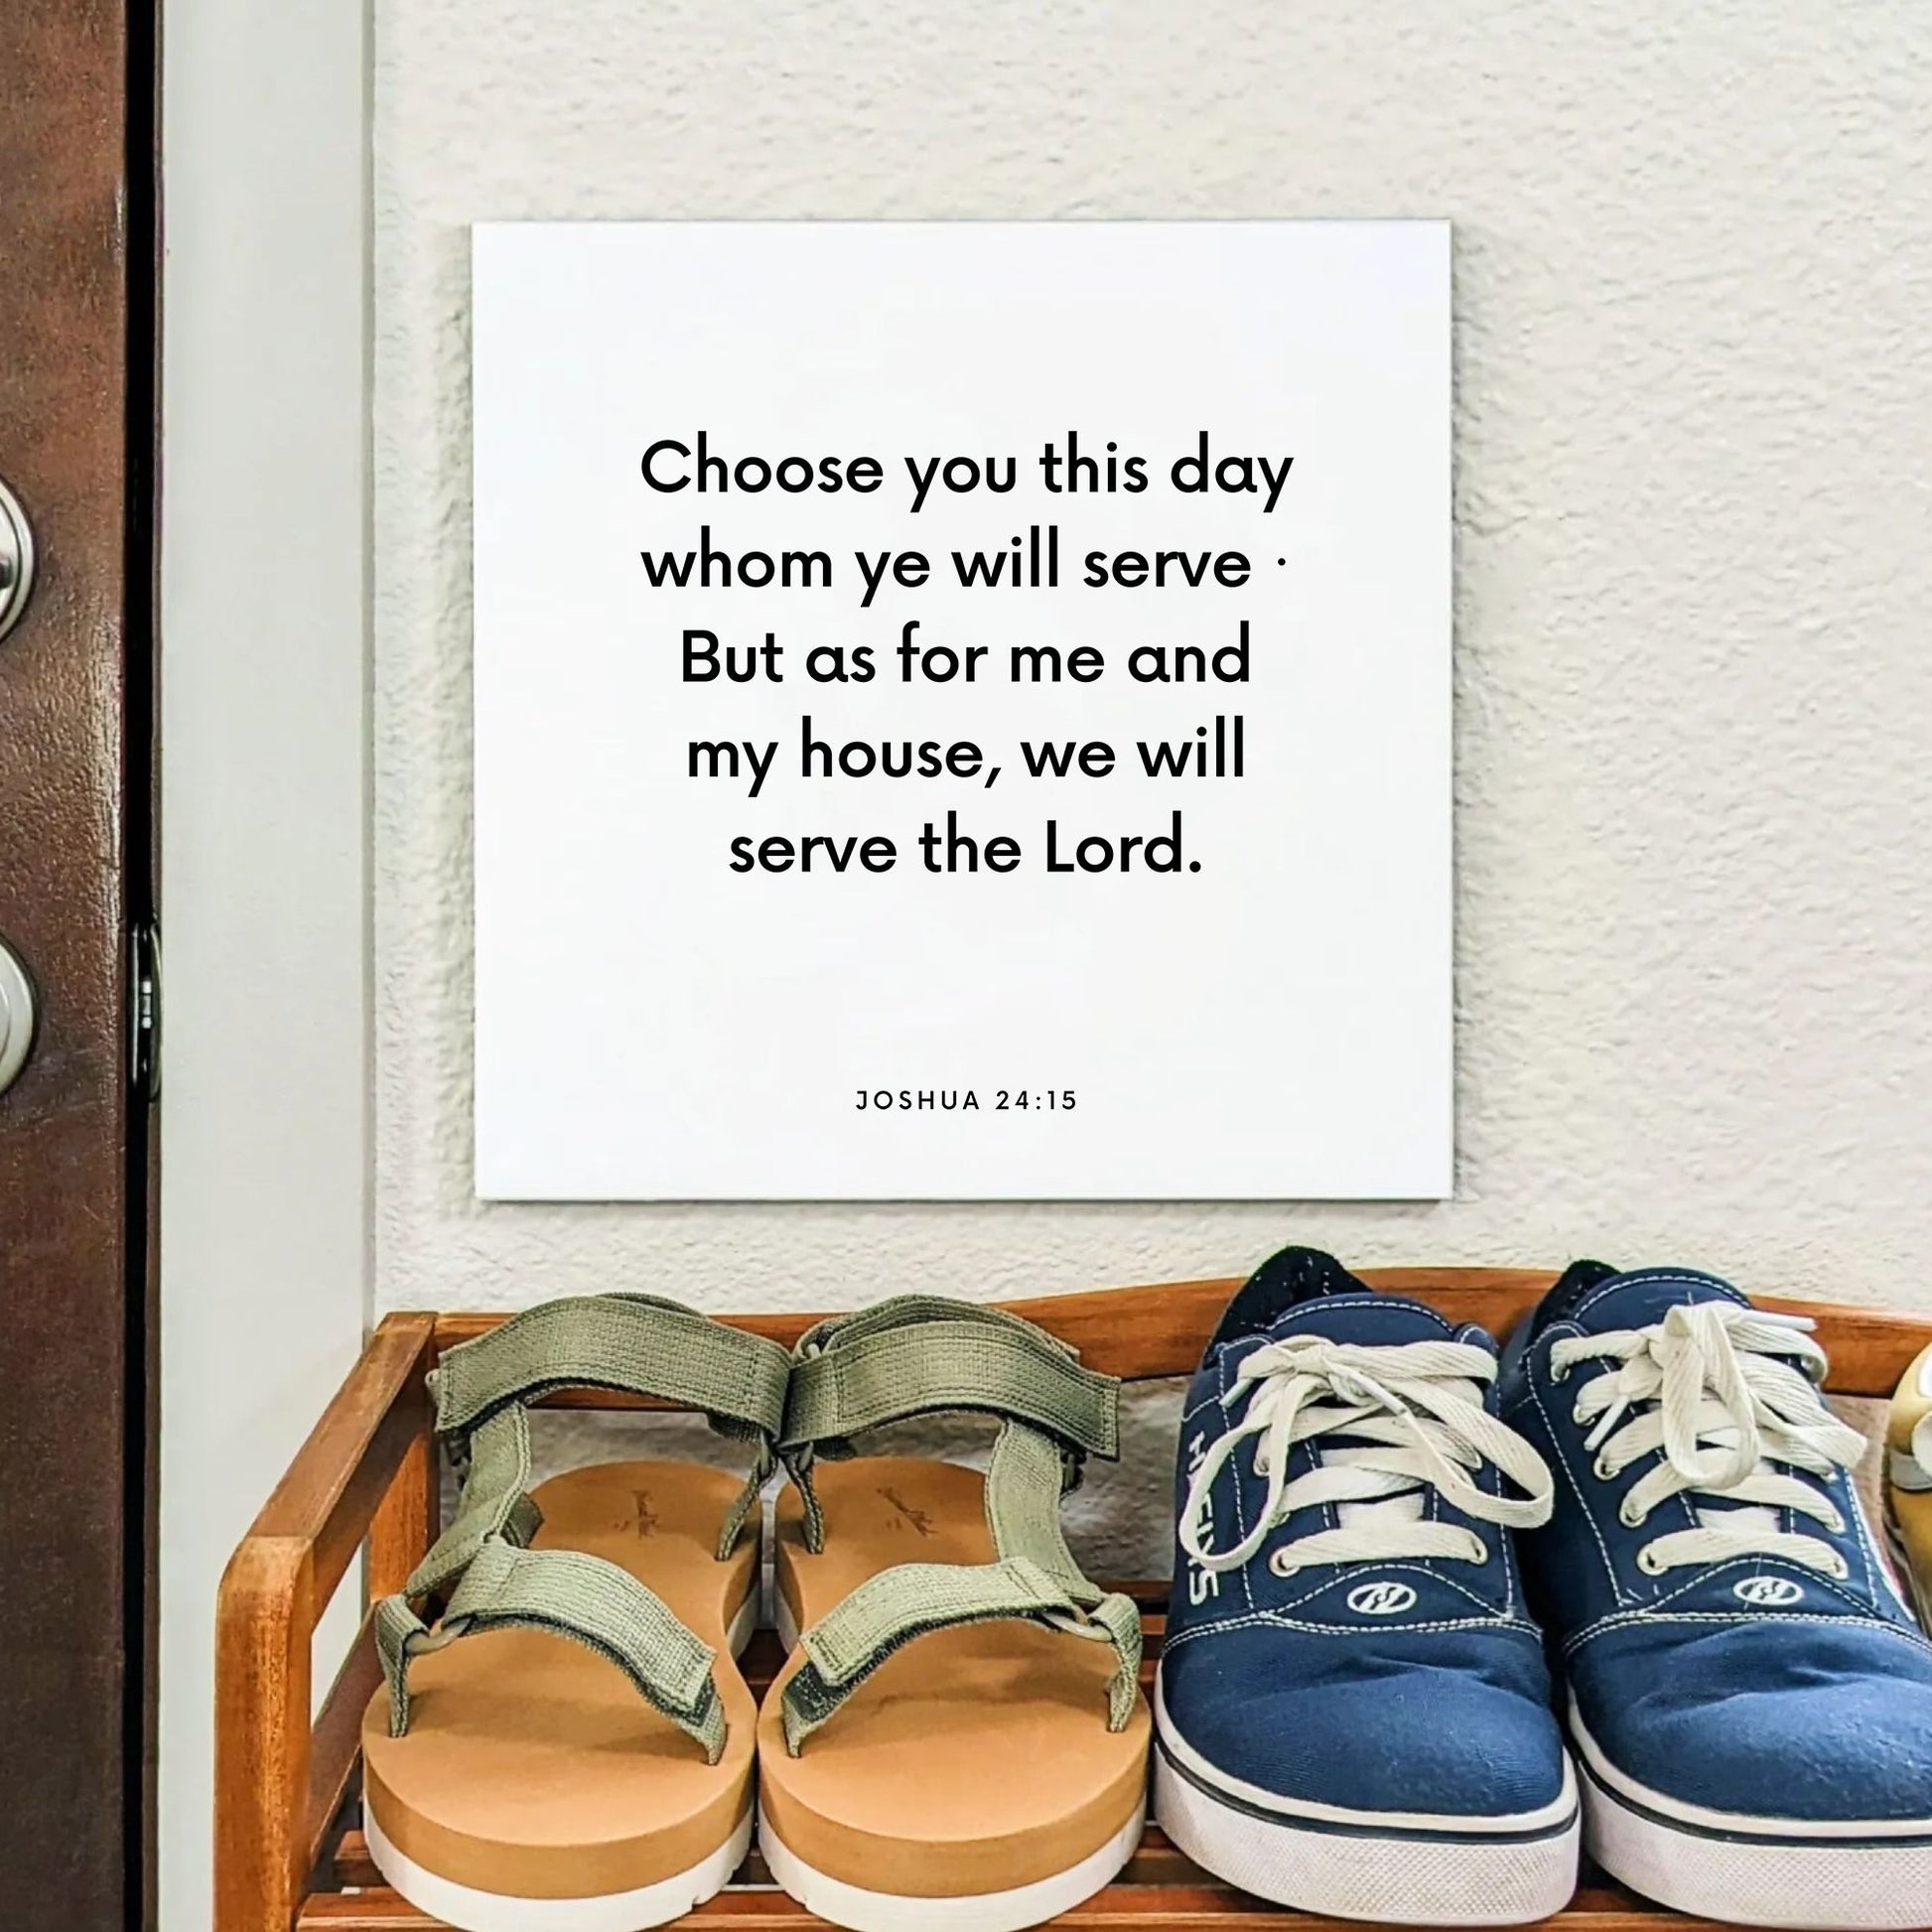 Shoes mouting of the scripture tile for Joshua 24:15 - "Choose you this day whom ye will serve"